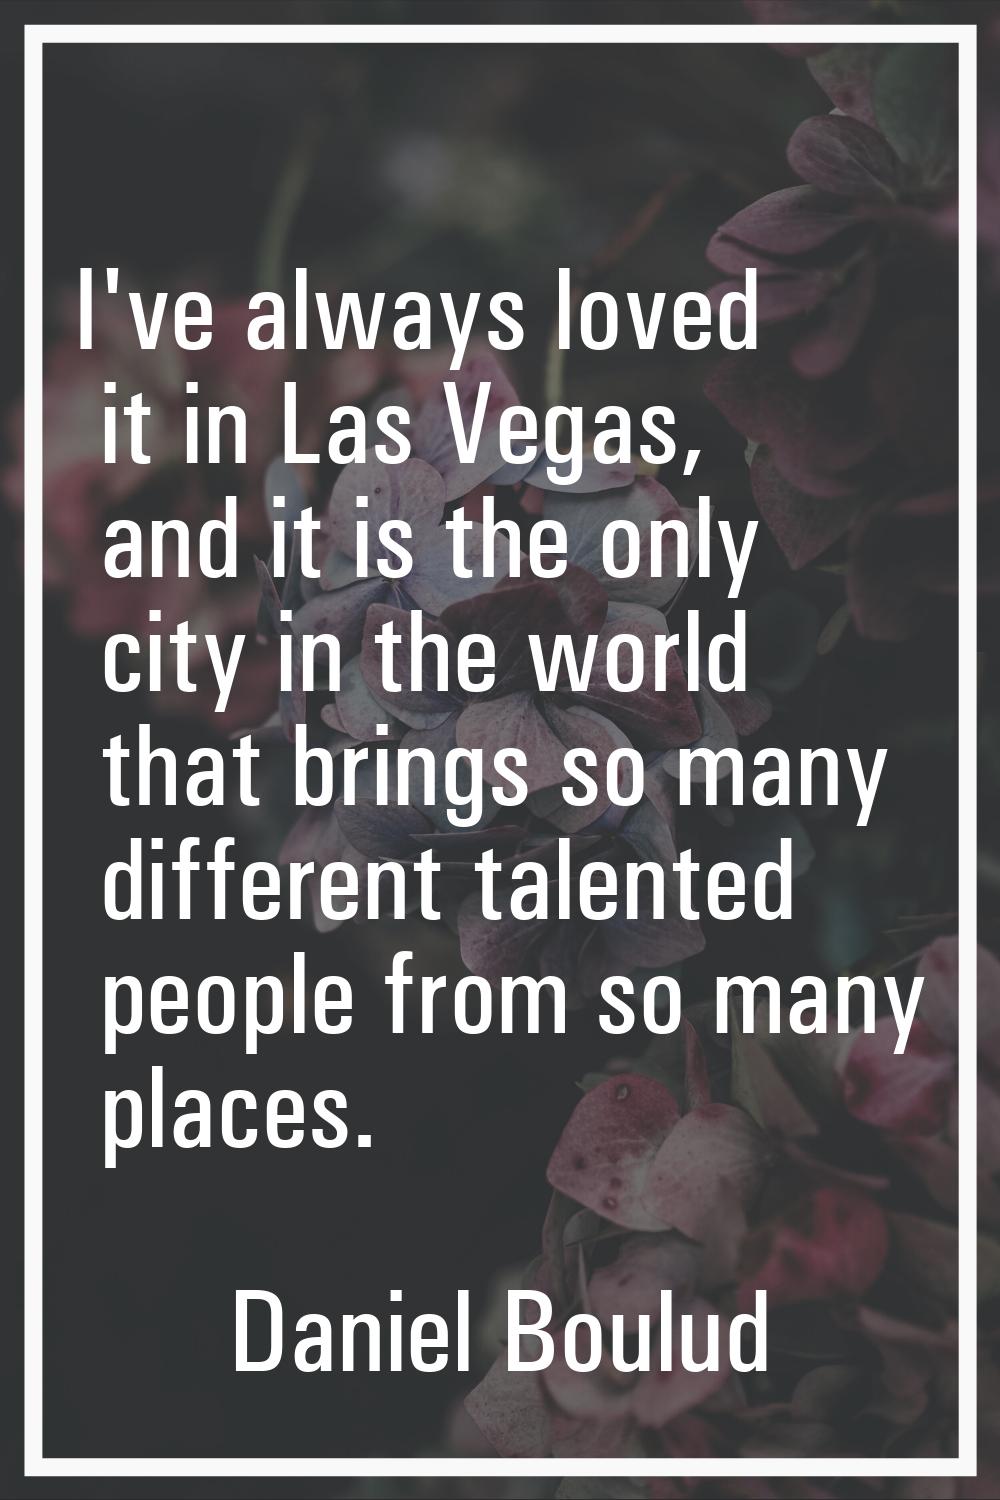 I've always loved it in Las Vegas, and it is the only city in the world that brings so many differe